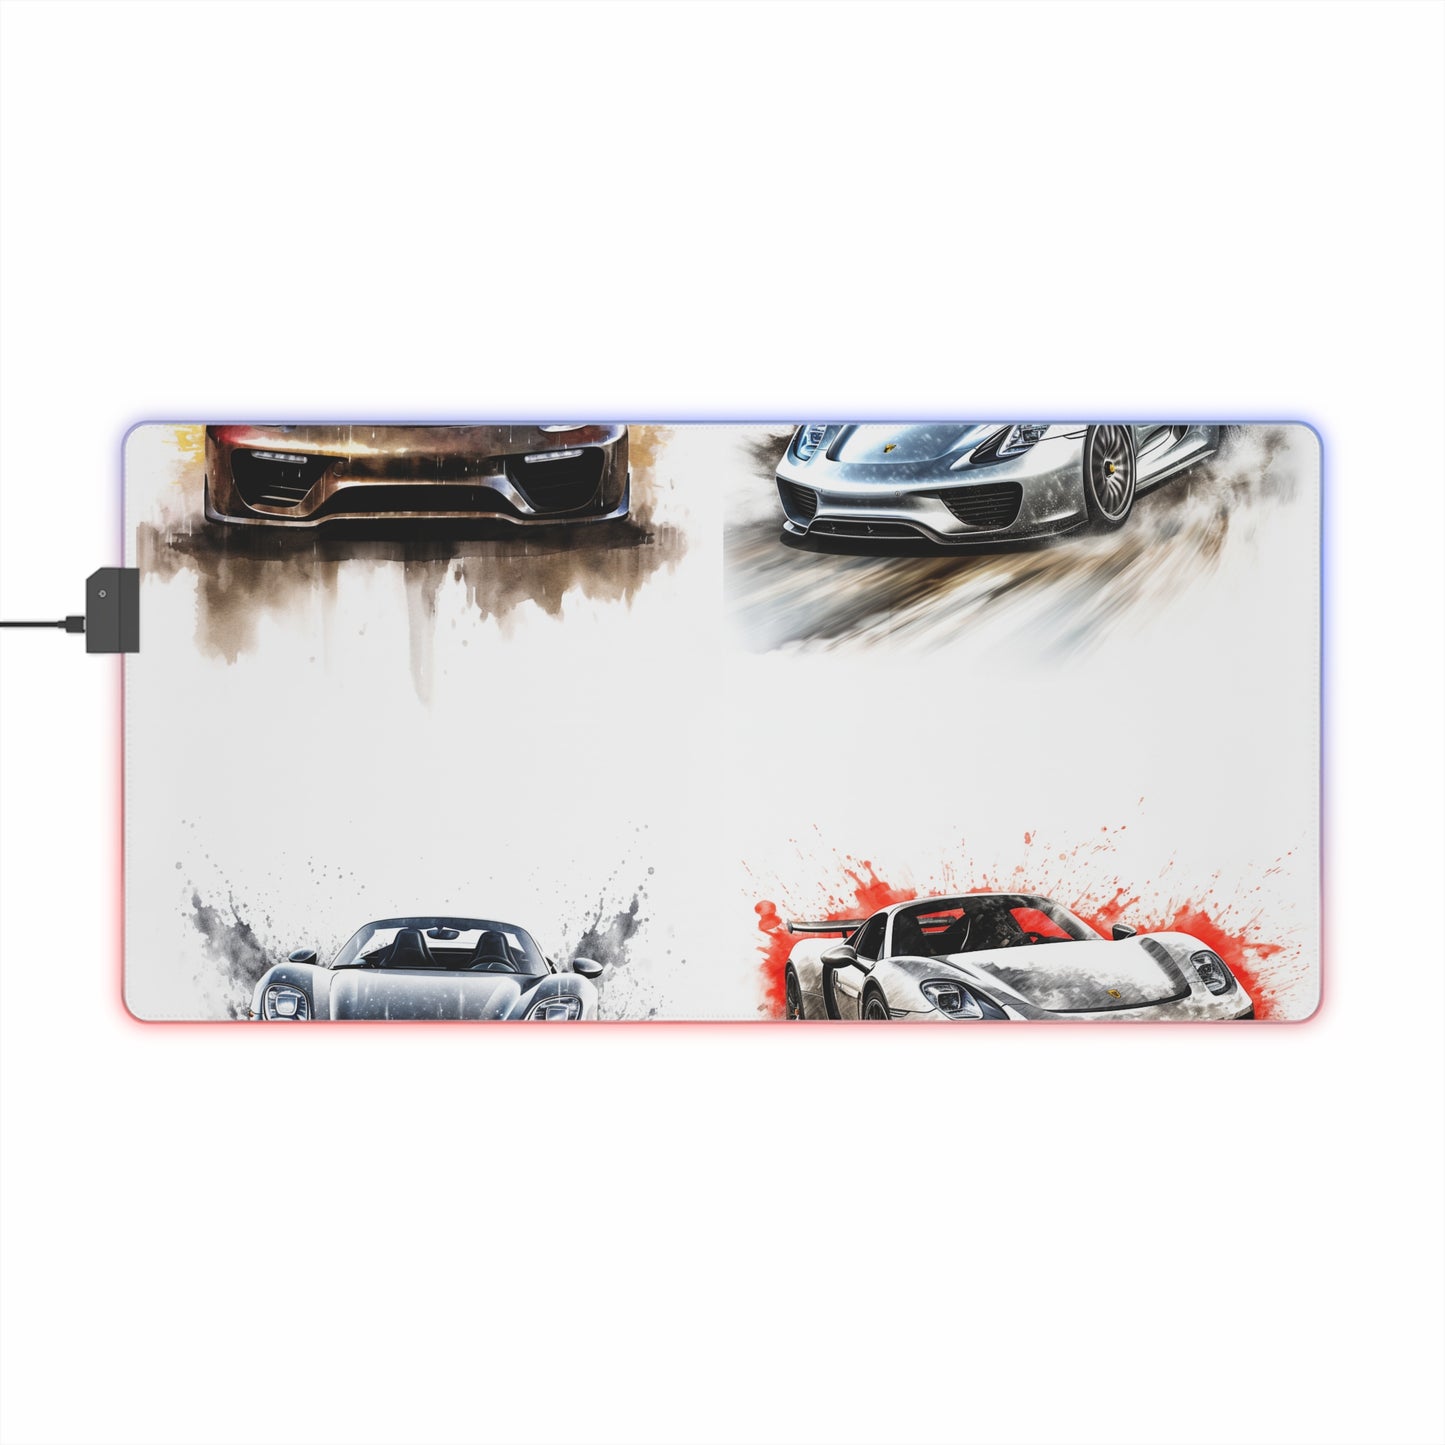 LED Gaming Mouse Pad 918 Spyder white background driving fast with water splashing 5